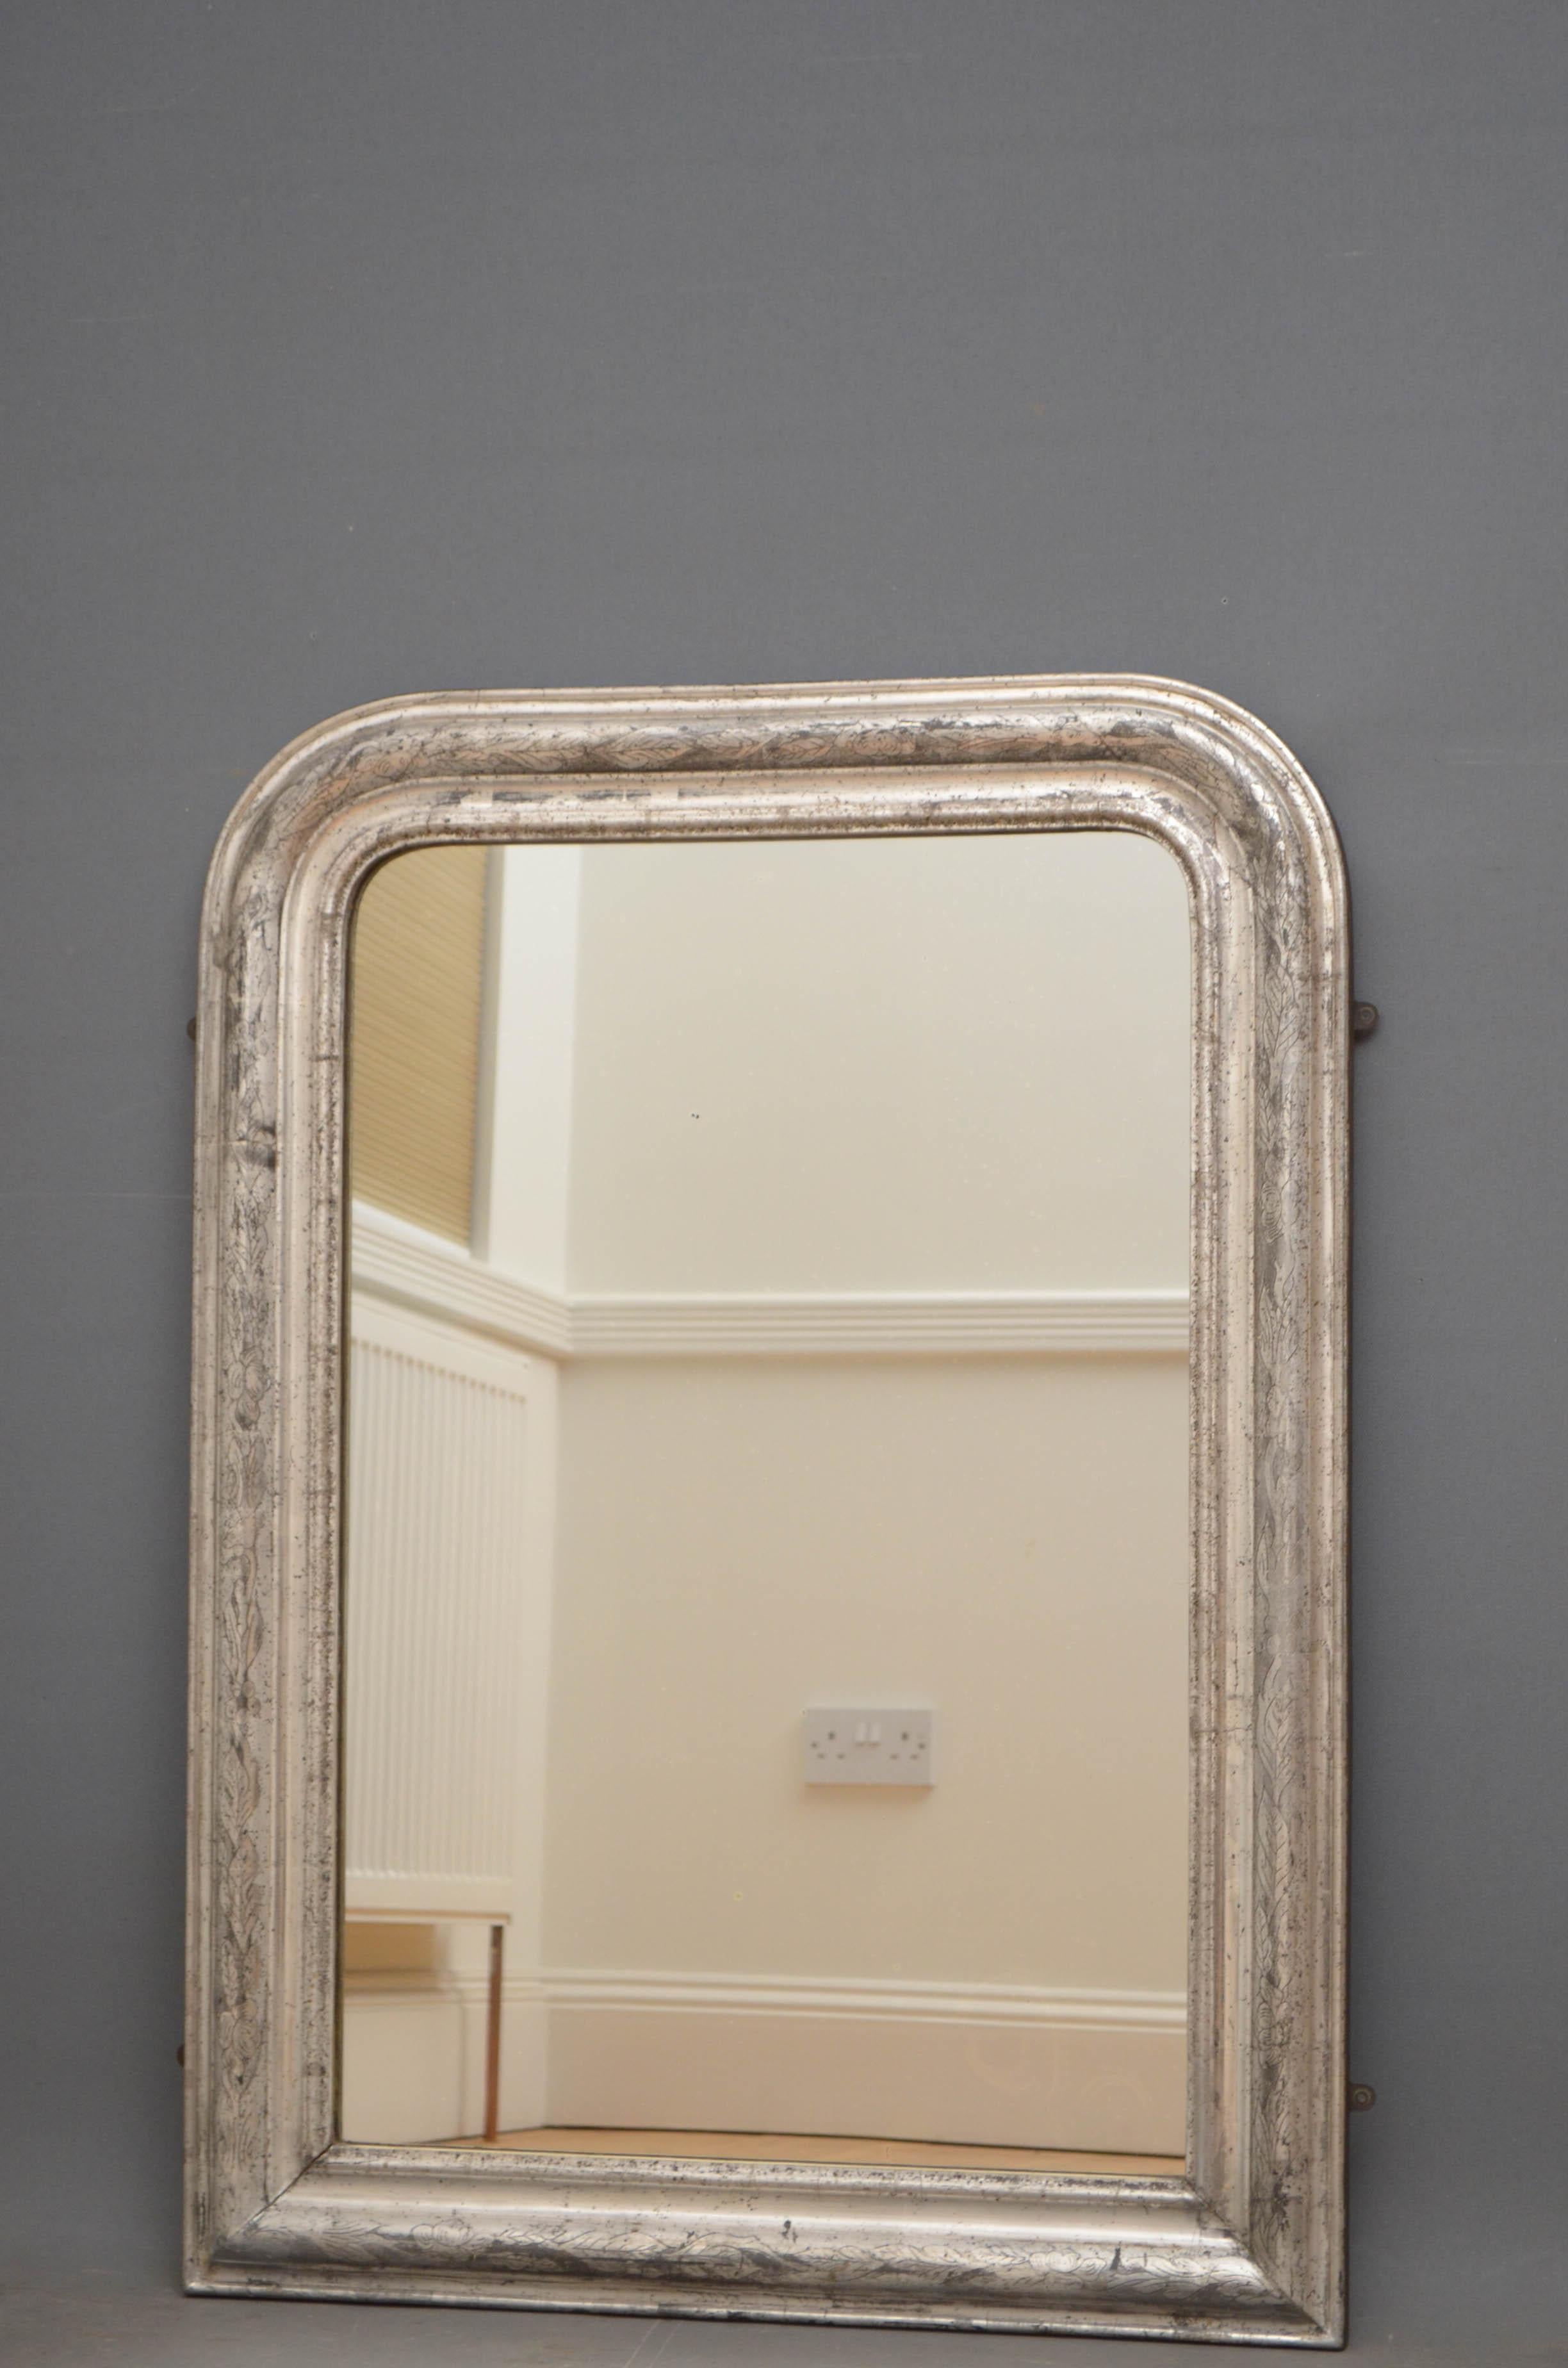 Sn4773, rare 19th century wall mirror in silver gilt, having original foxed glass in finely decorated silver leaf frame, all in excellent home ready condition, circa 1860
Measures: H38.5